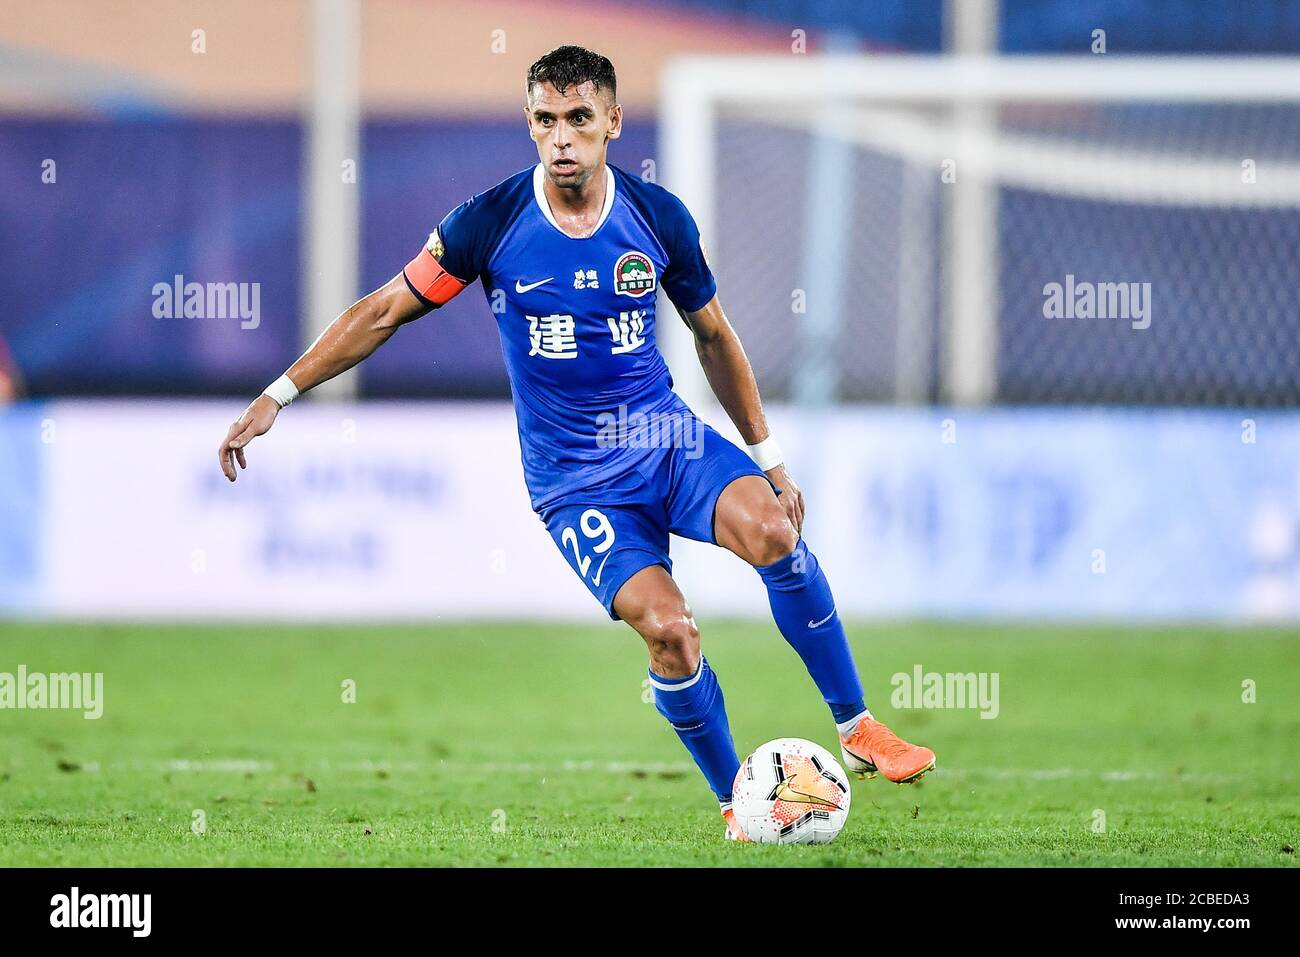 Brazilian football player Olivio da Rosa, also known as Ivo, of Henan Jianye F.C. keeps the ball during the fourth-round match of 2020 Chinese Super League (CSL) against Shenzhen F.C., Dalian city, northeast China's Liaoning province, 10 August 2020. Shenzhen F.C. was defeated by Henan Jianye F.C. with 1-2. Stock Photo